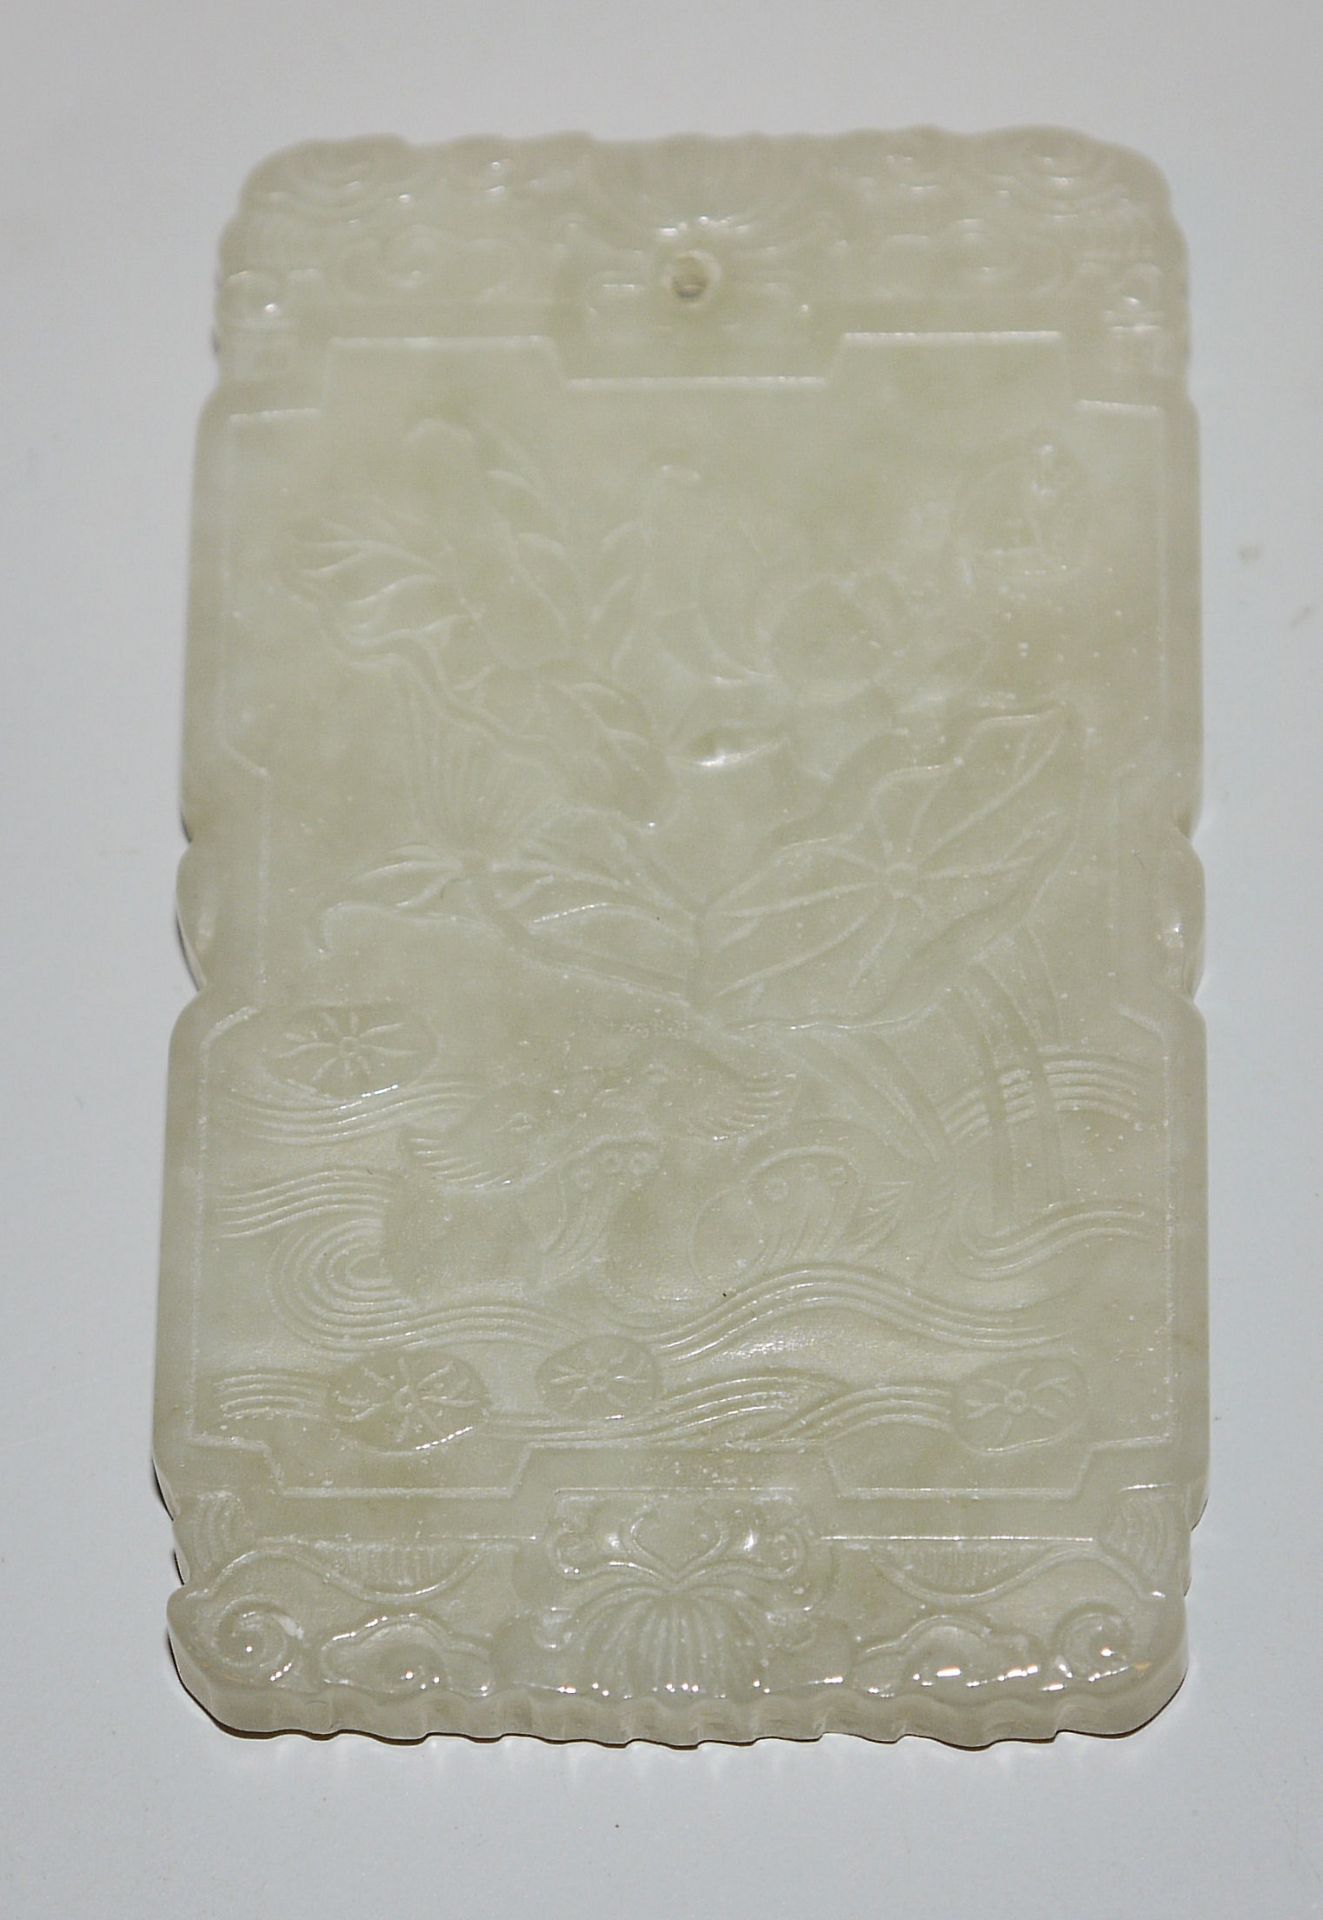 Hsuming, Chinese lucky amulet of fine jade